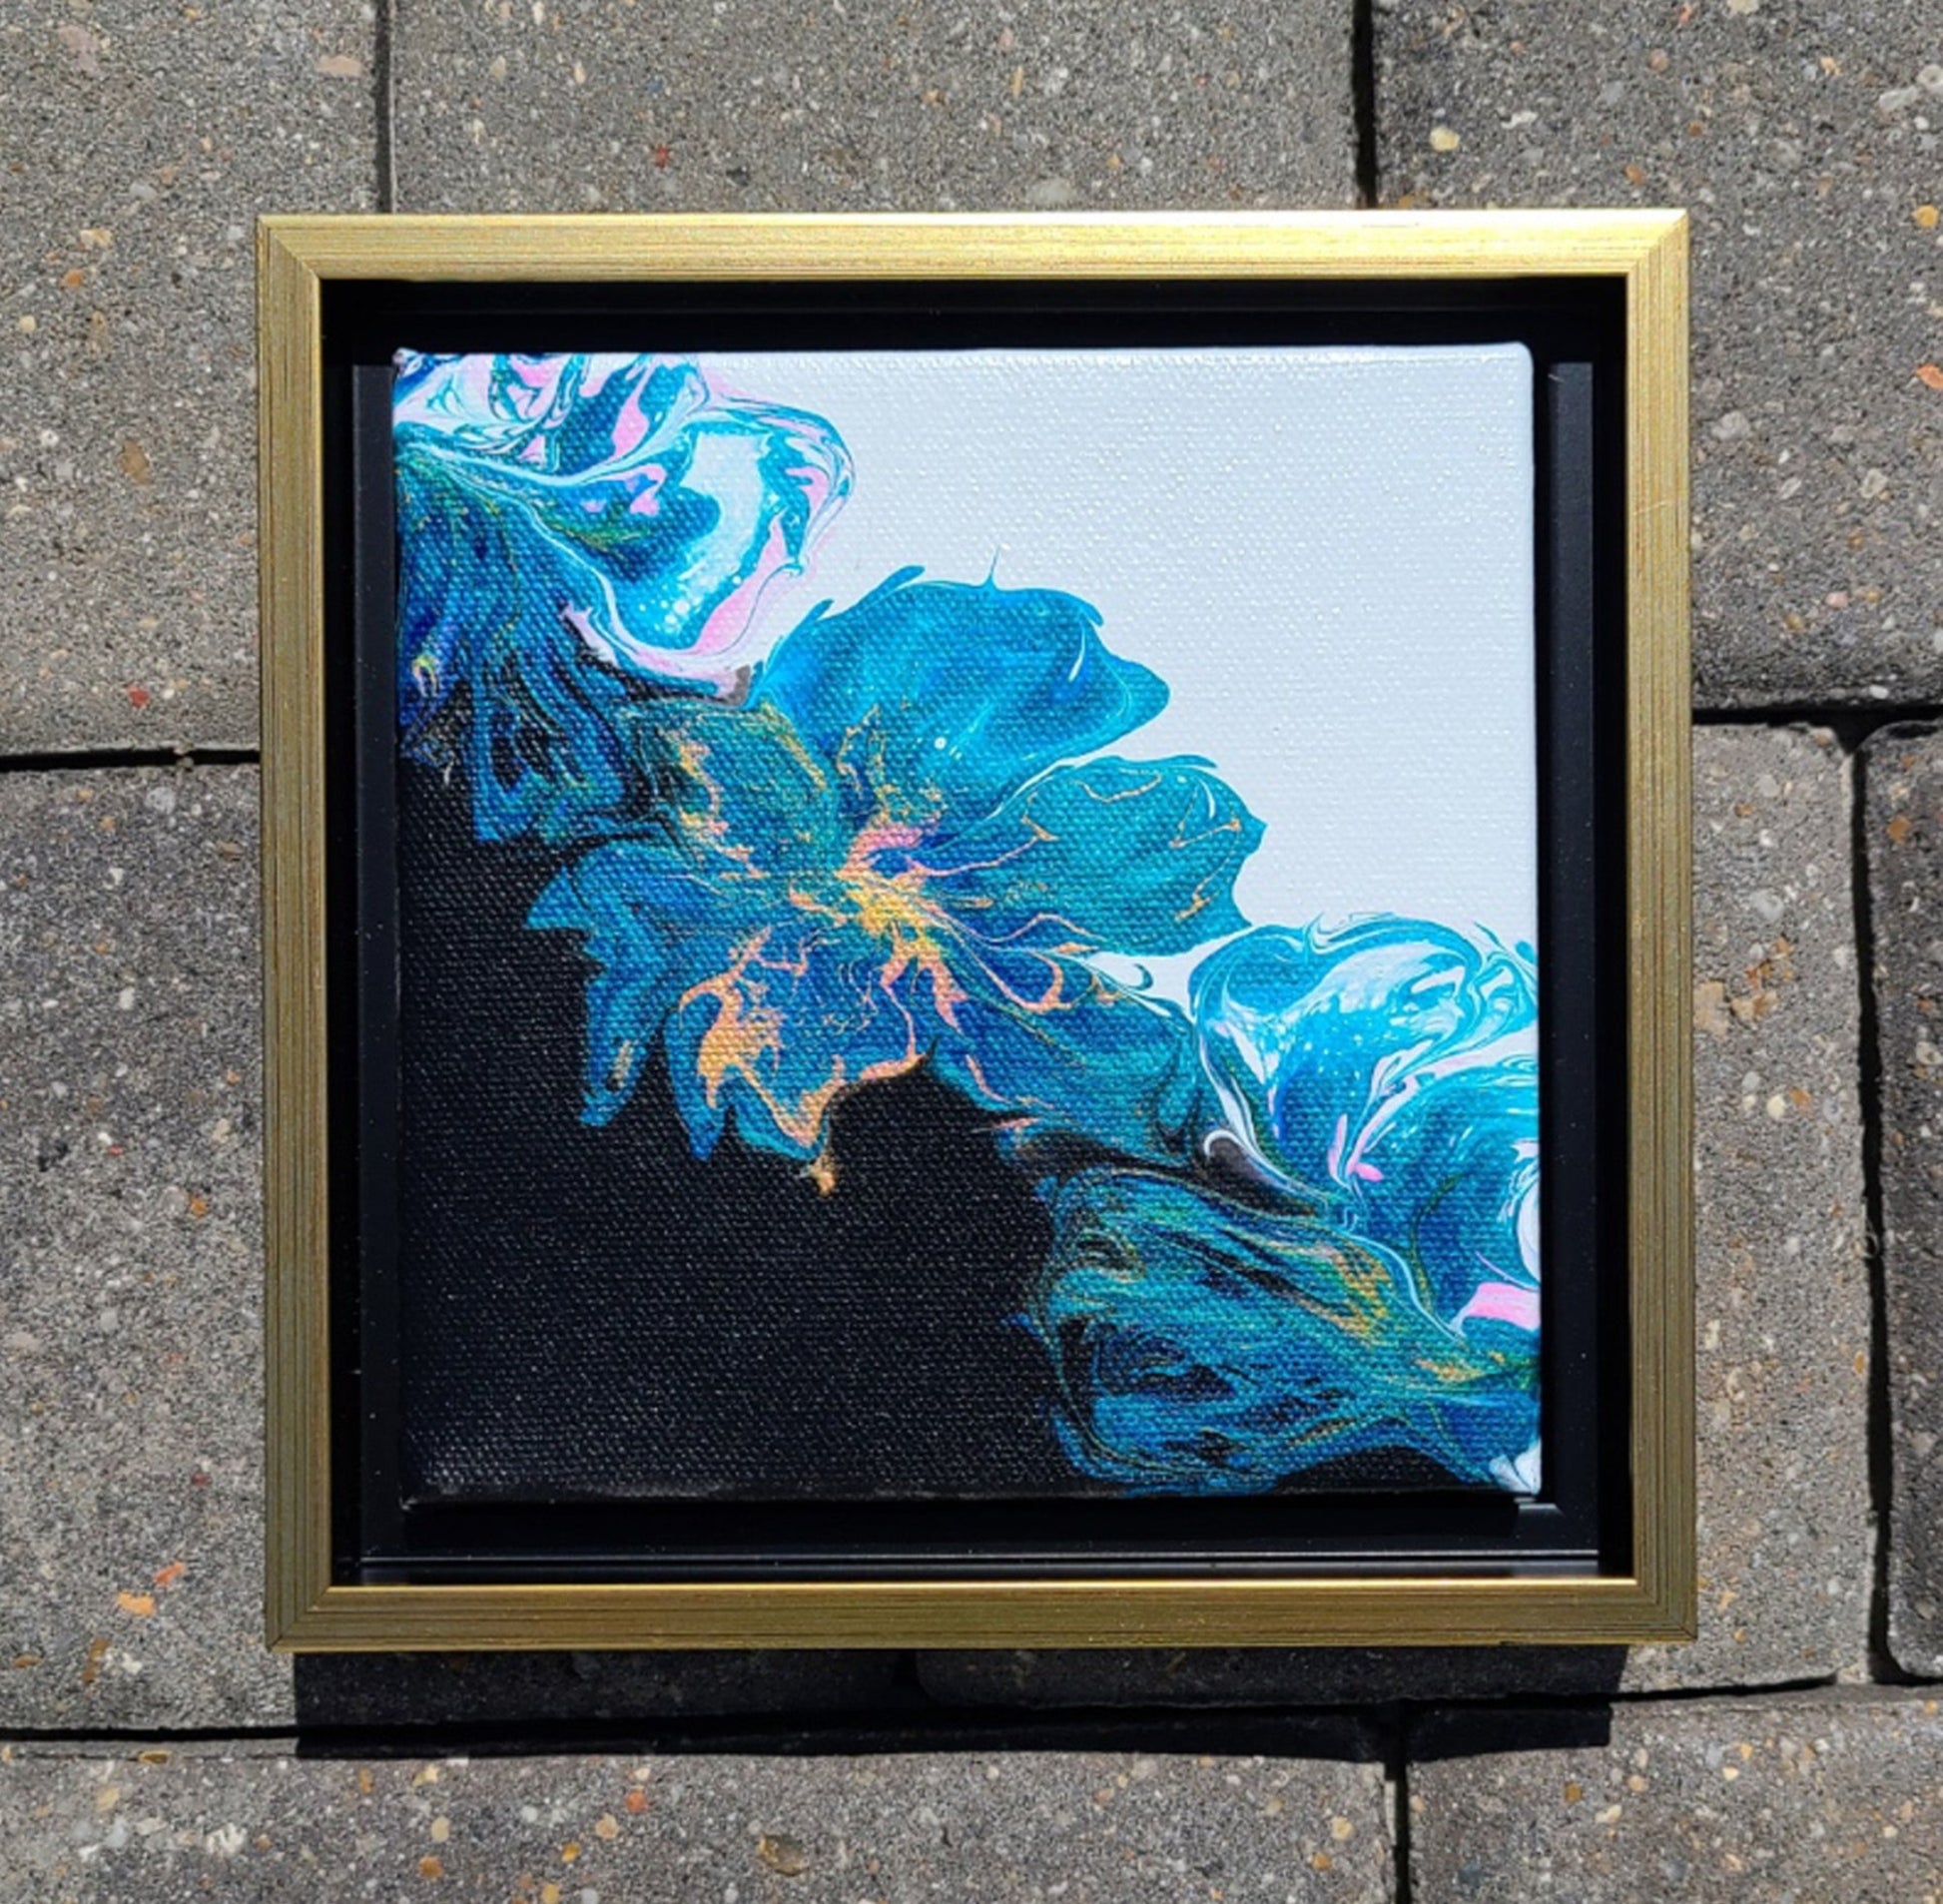 Small piece of art with big impact!  The canvas is 6 x 6 in a floater frame.  Artwork can hang or sit on a shelf or table.  Artwork has a bi-color black and white background.  The blooms are teal/turquoise, gold and pink.  Floater frame is black and gold.  Approximate overall measurements: 7.25 x 7.25 x 1.25 inches  I can sign on the back if you'd like.